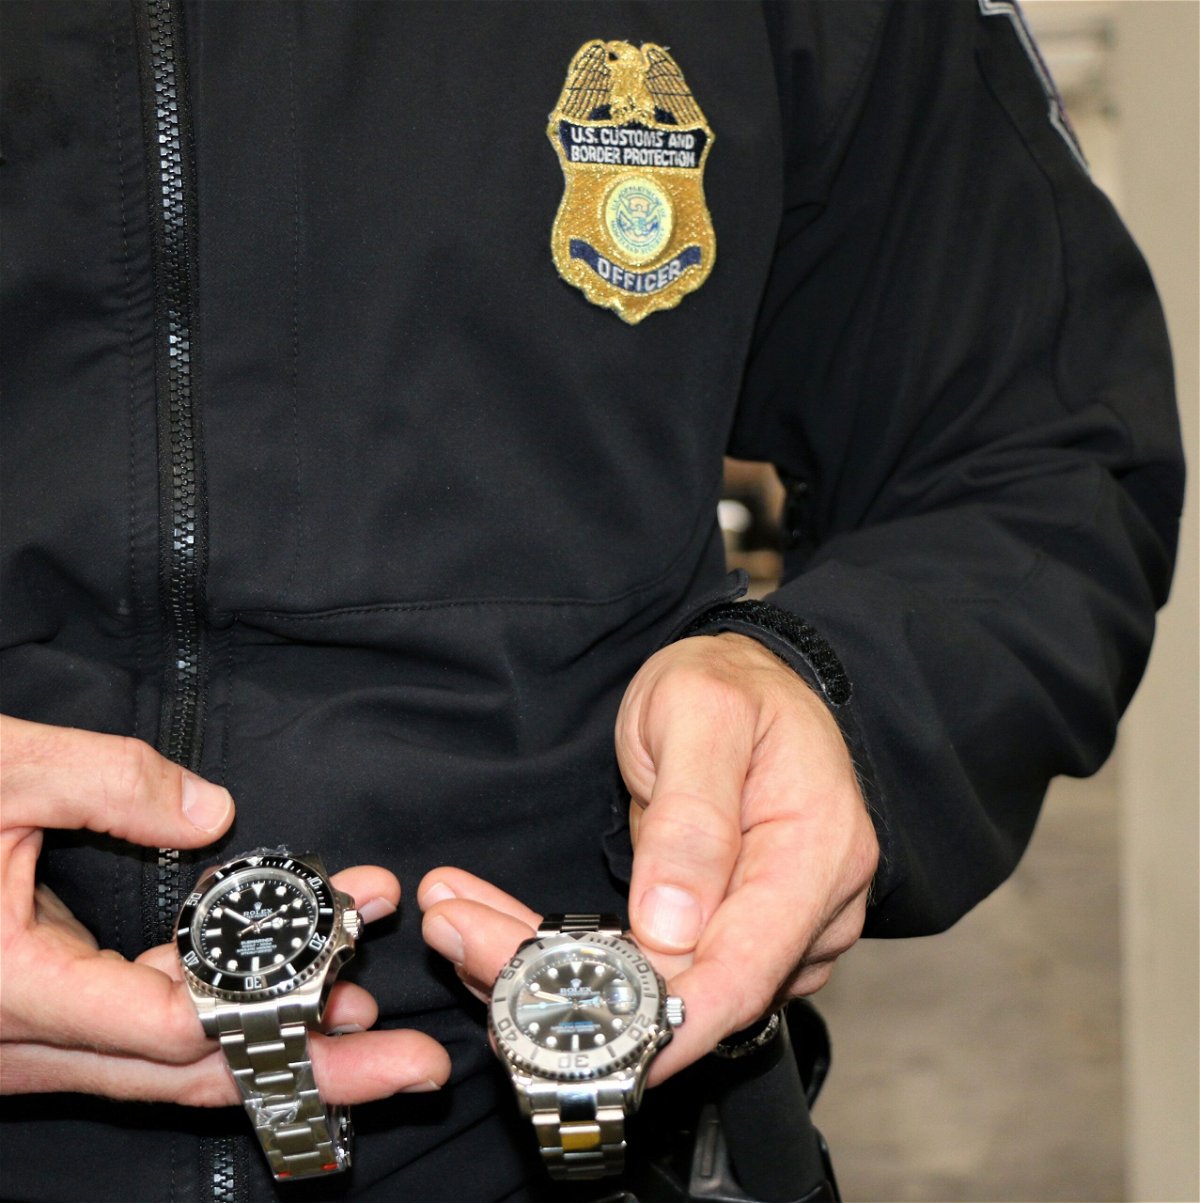 <i>US Customs and Border Protection</i><br/>US Customs and Border Protection officers seized fake luxury watches at Los Angeles International Airport that -- if they were legitimate -- would be worth more than $1.2 million.